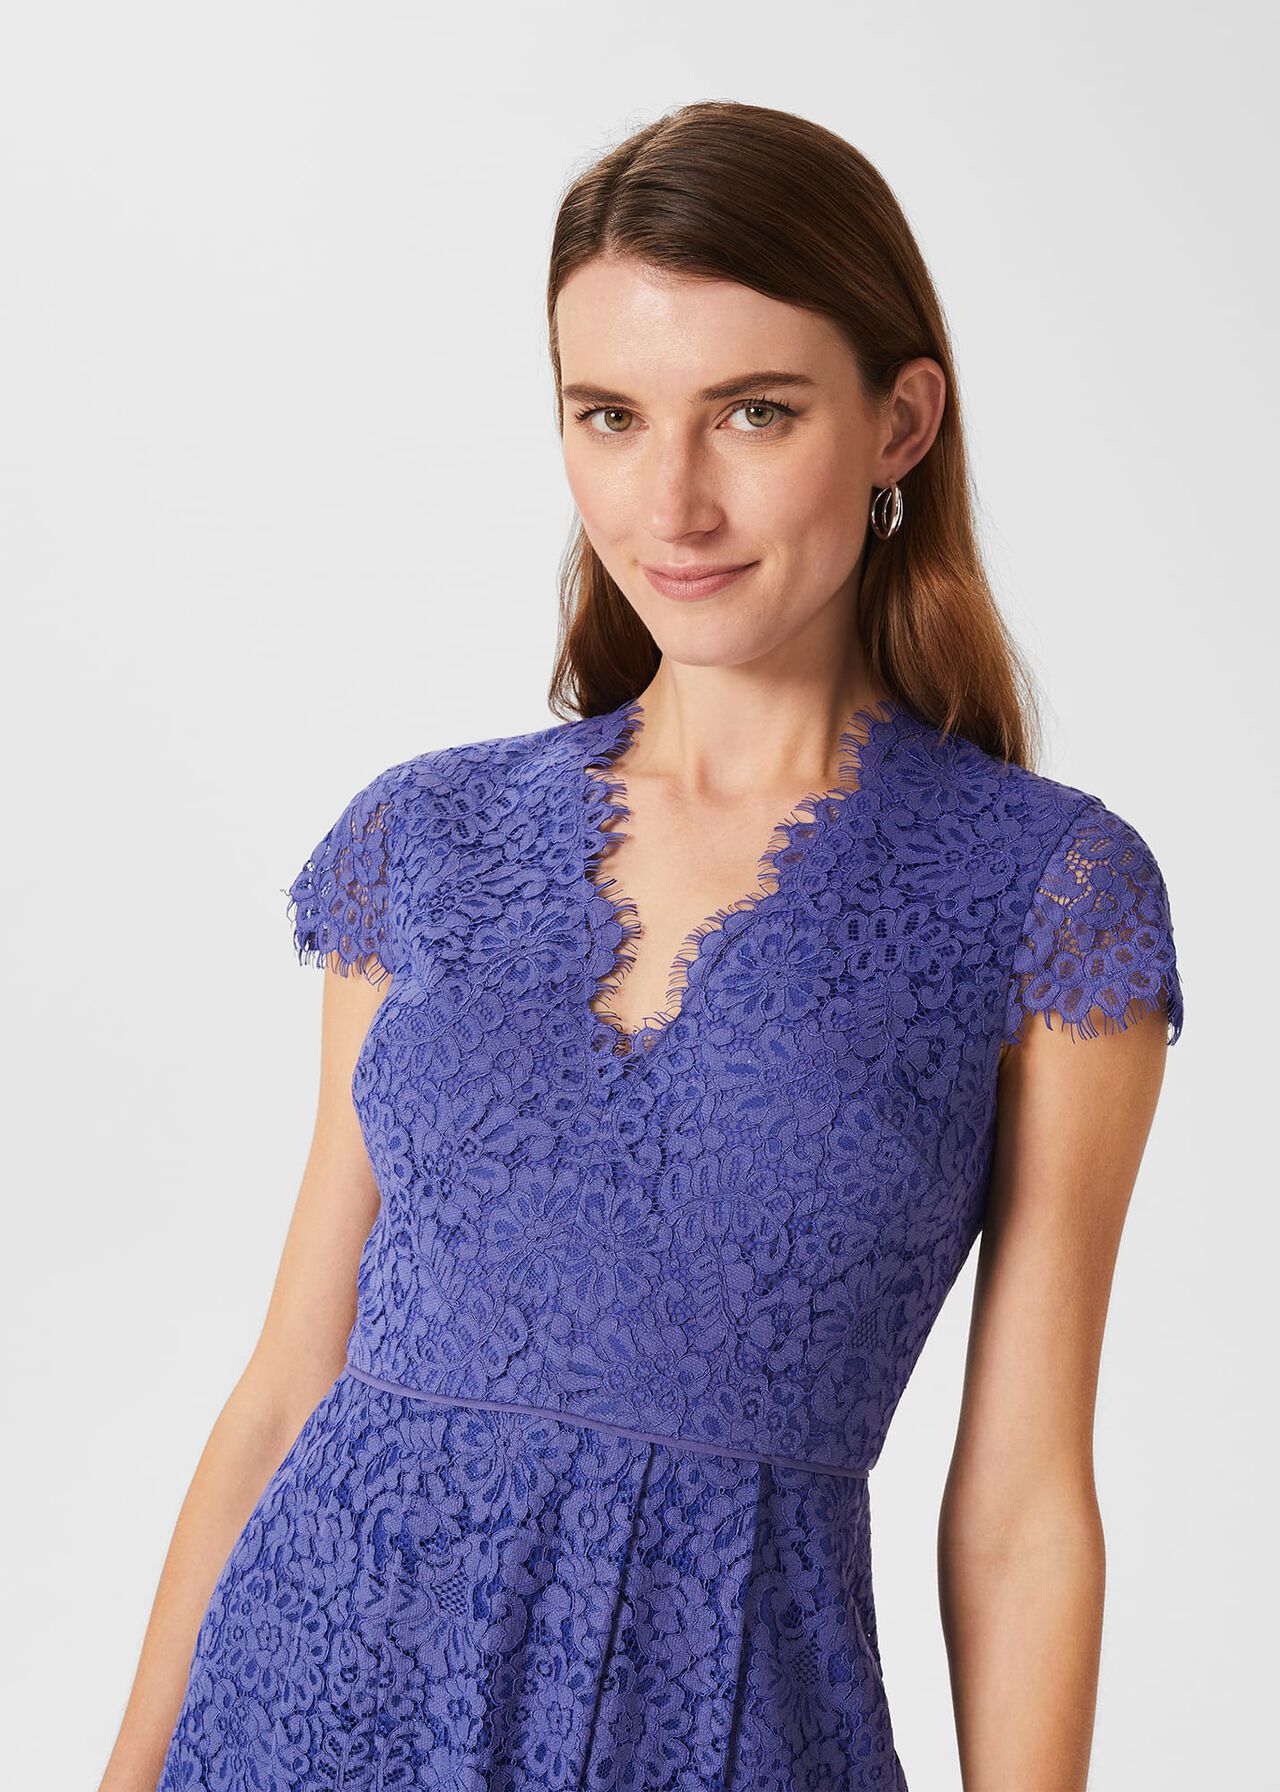 Anastasia Lace Fit And Flare Dress, Blue, hi-res